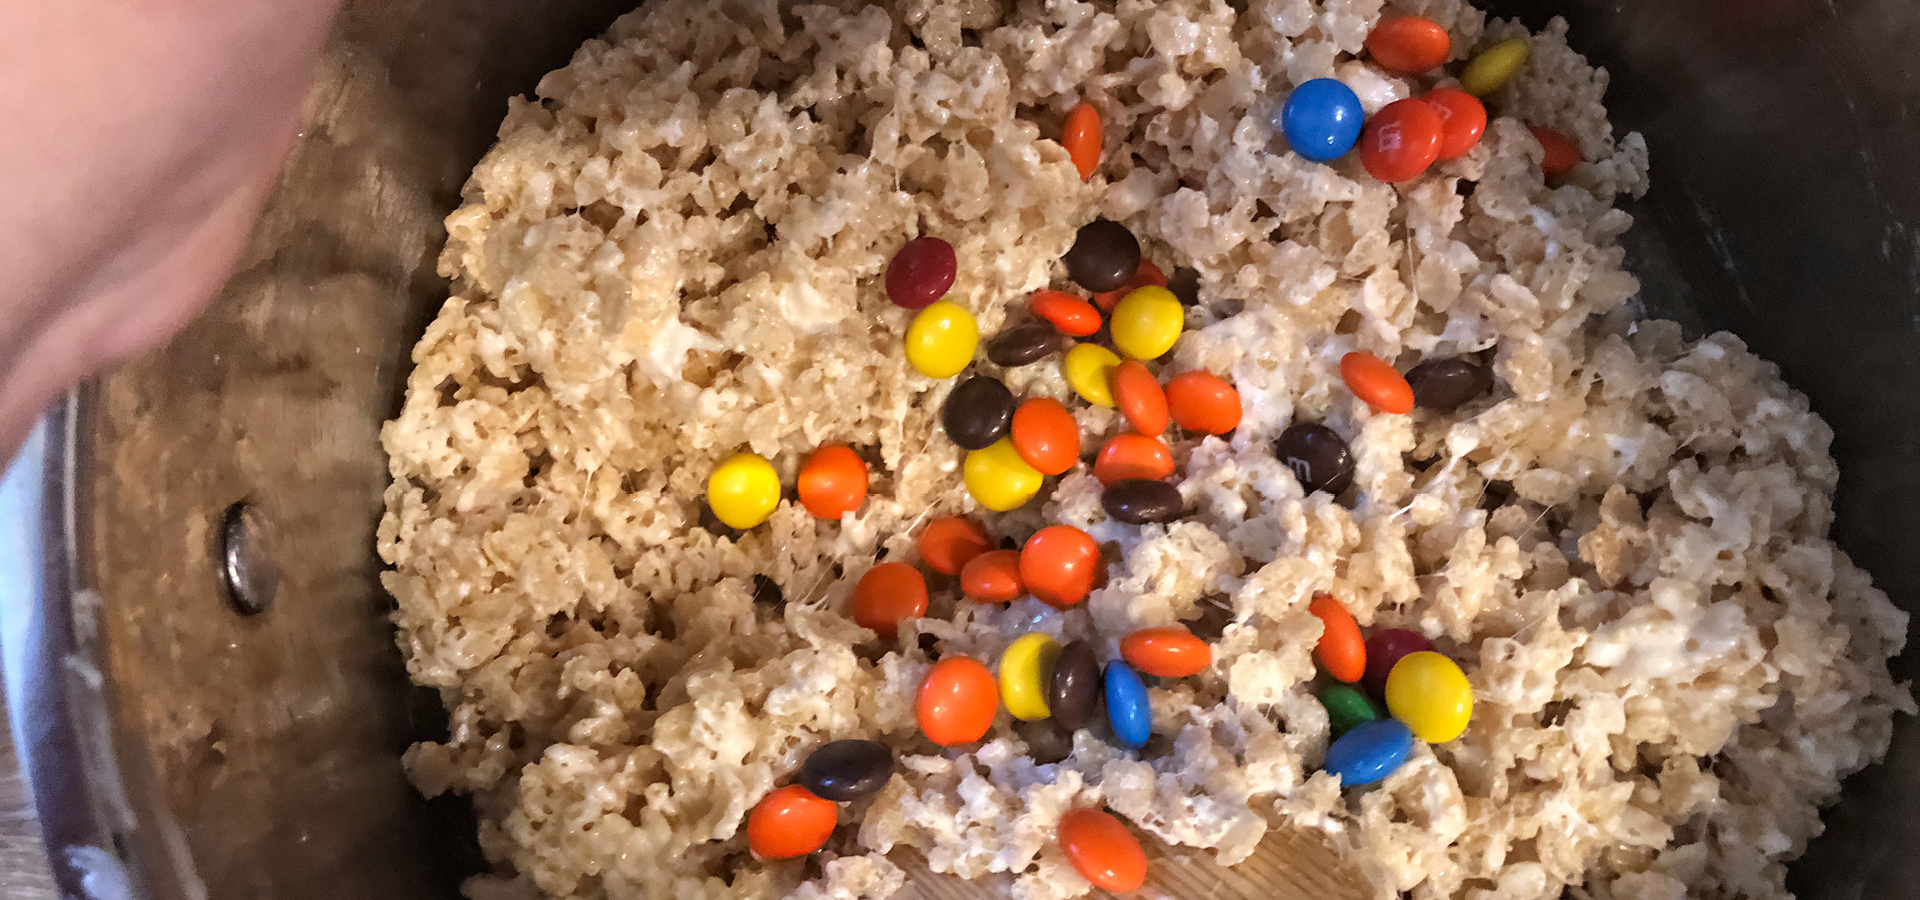 mix-the-candy-and-krispies